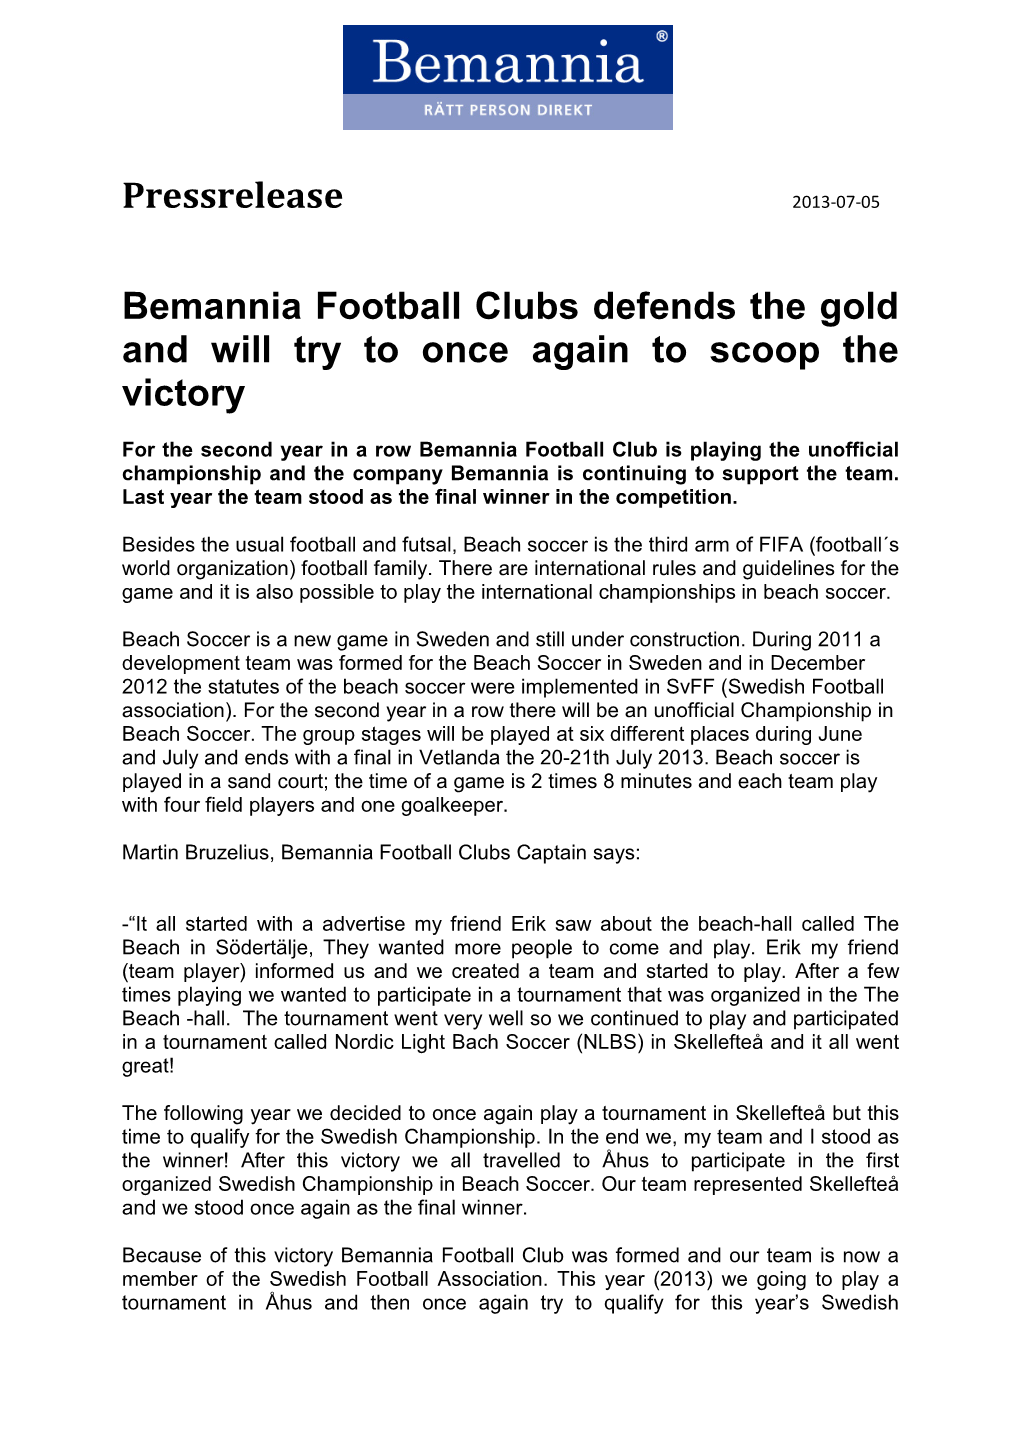 Pressrelease Bemannia Football Clubs Defends the Gold and Will Try